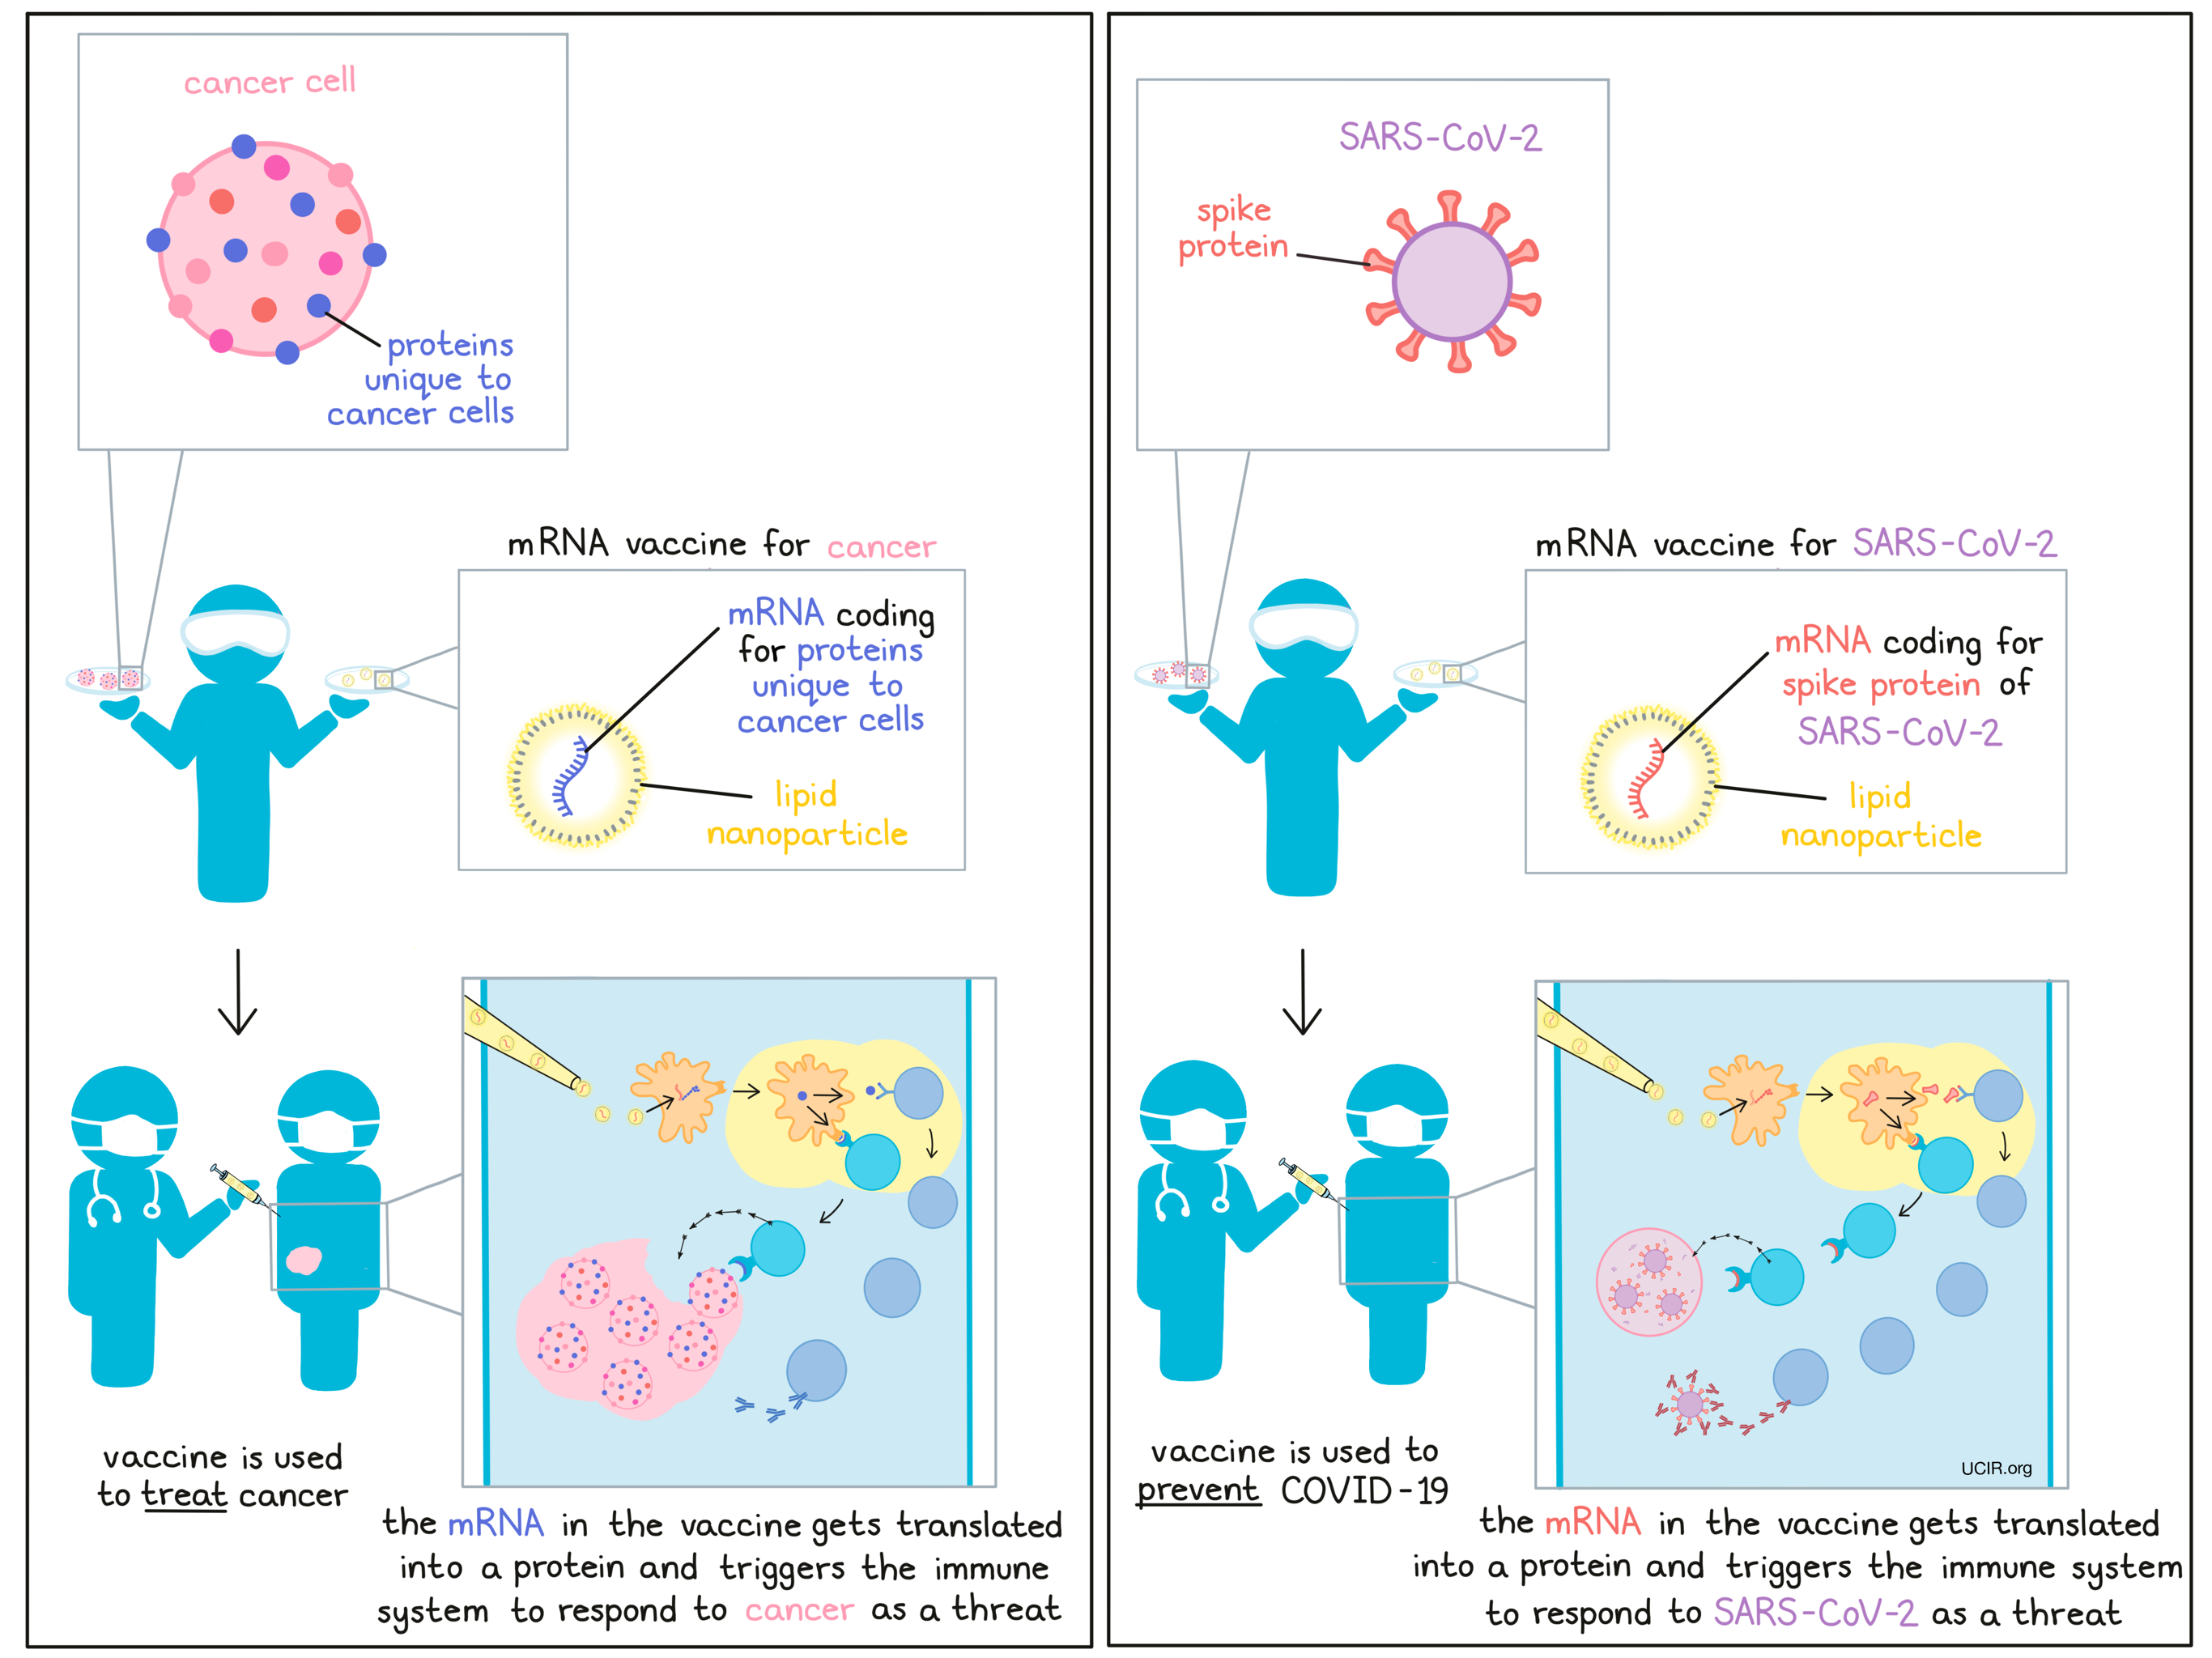 mRNA vaccines: from cancer immunotherapy to COVID-19